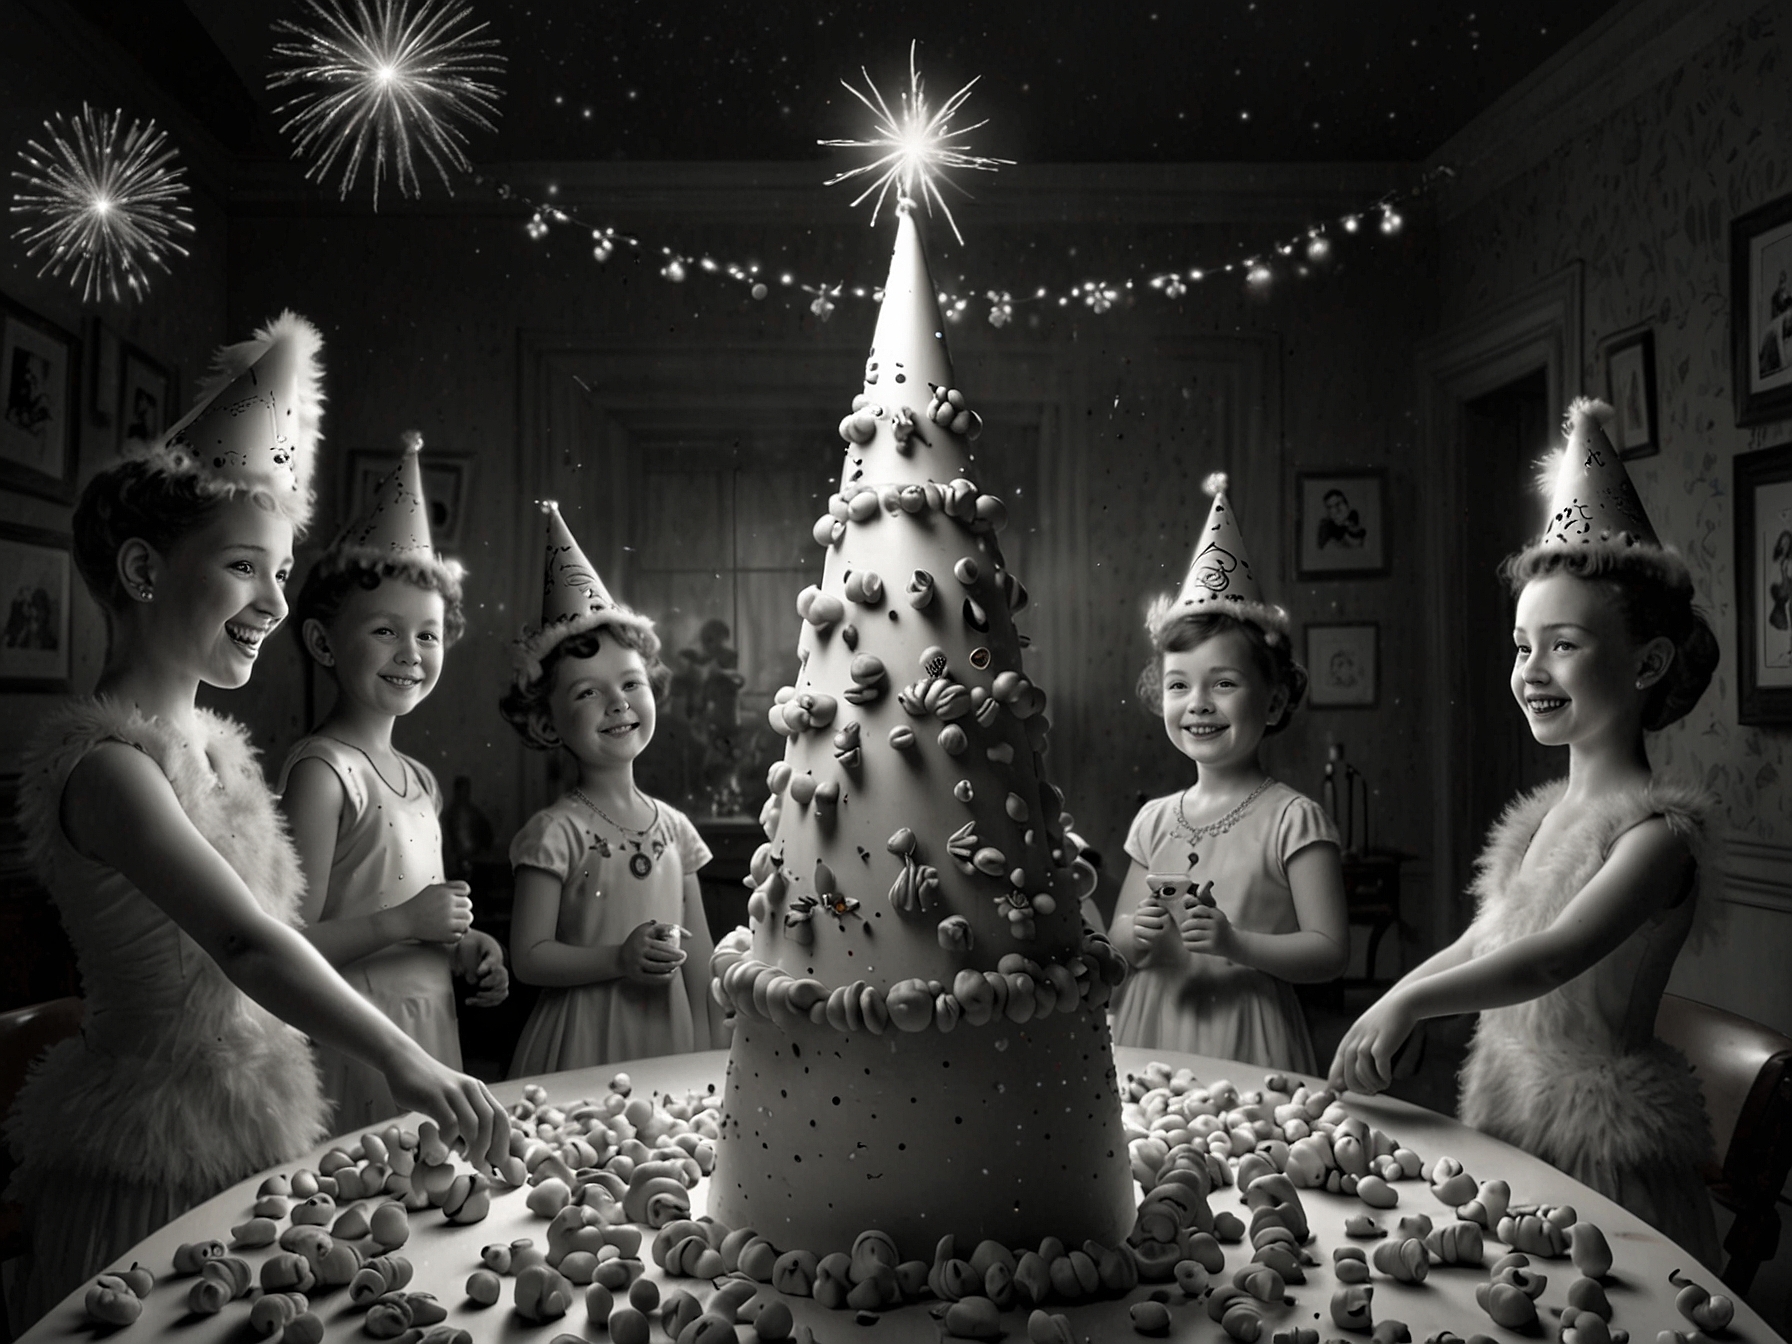 An image showing Lucy with a party hat, surrounded by Peanuts characters, celebrating New Year's Eve. The scene captures the joyful atmosphere of 'Snoopy Presents: For Auld Lang Syne'.